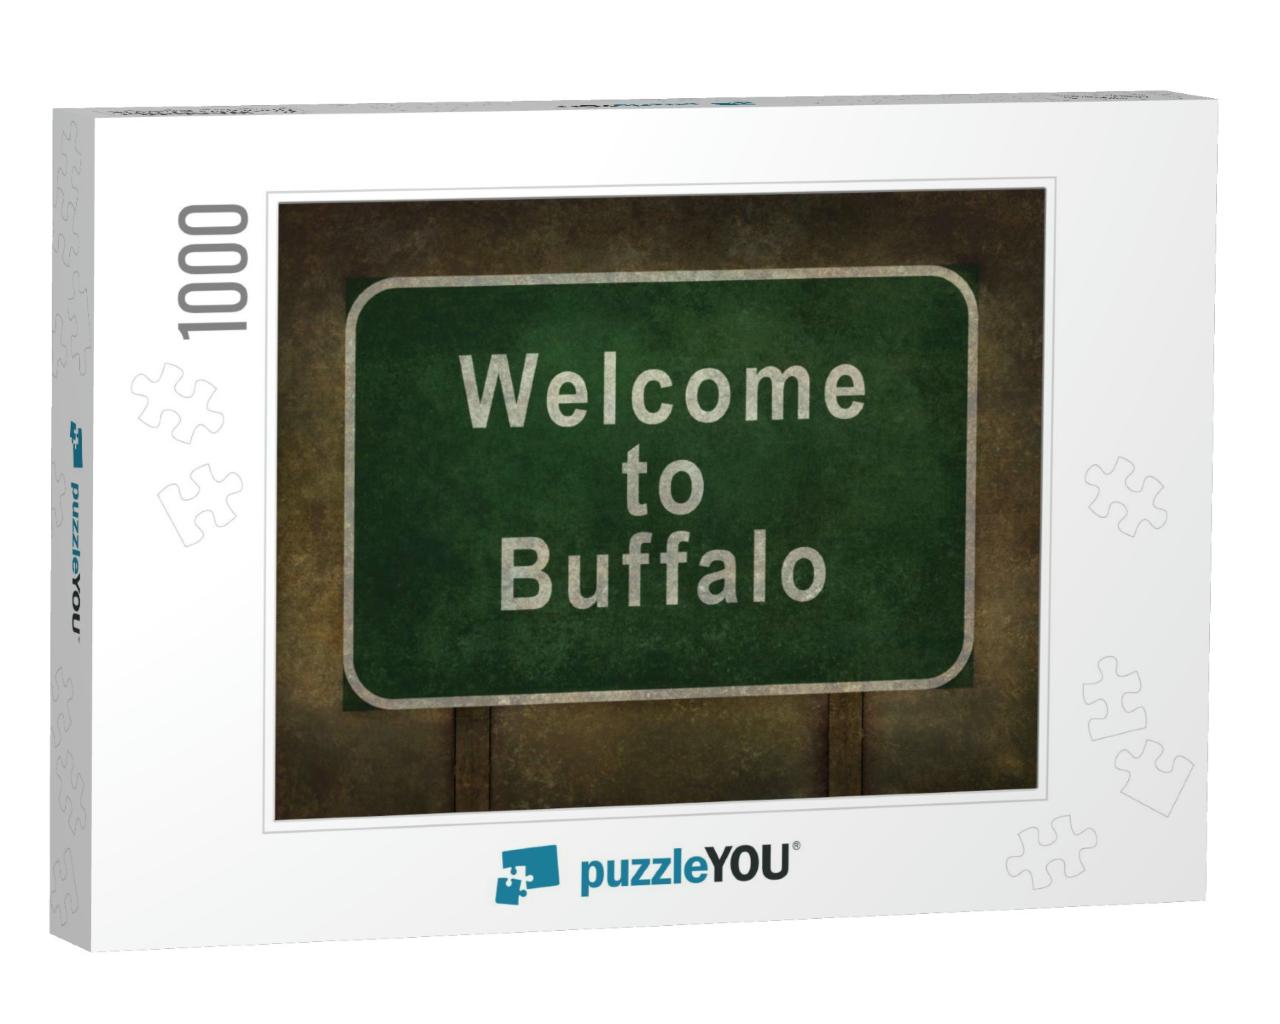 Welcome to Buffalo Road Sign Illustration, with Distresse... Jigsaw Puzzle with 1000 pieces